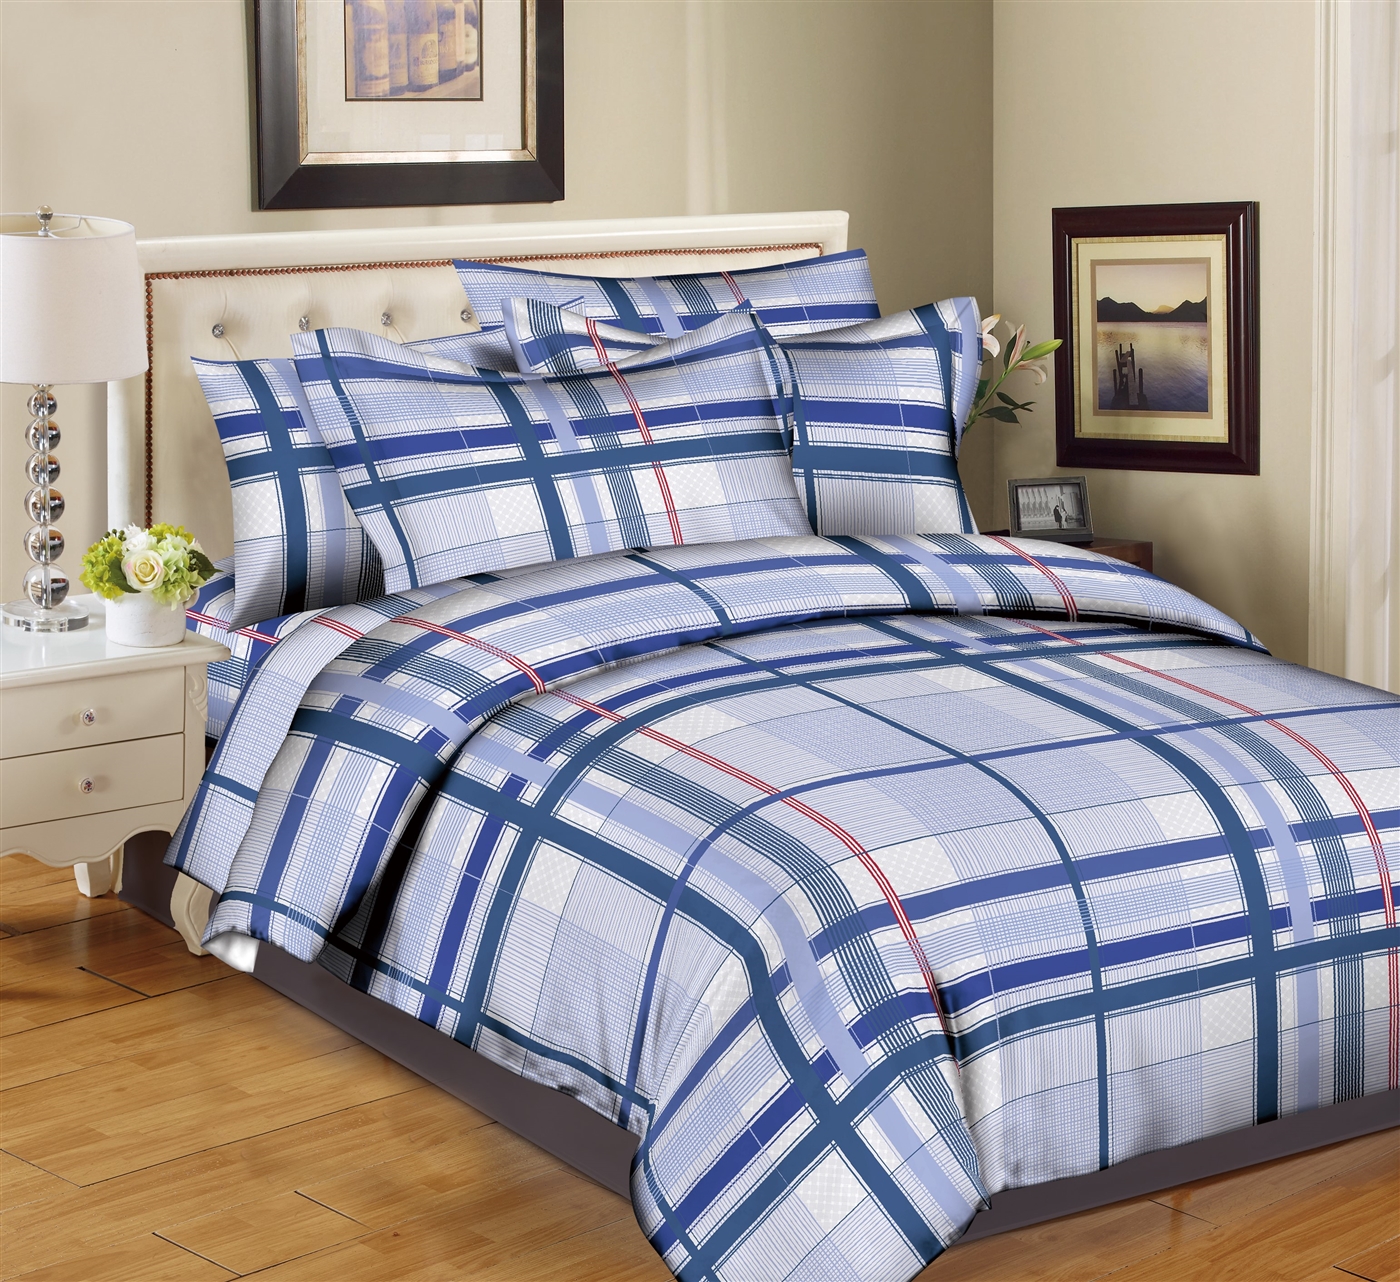 Better Bed Collection: Plaid Blue 8PC Bedding Sets - 200 Thread Count